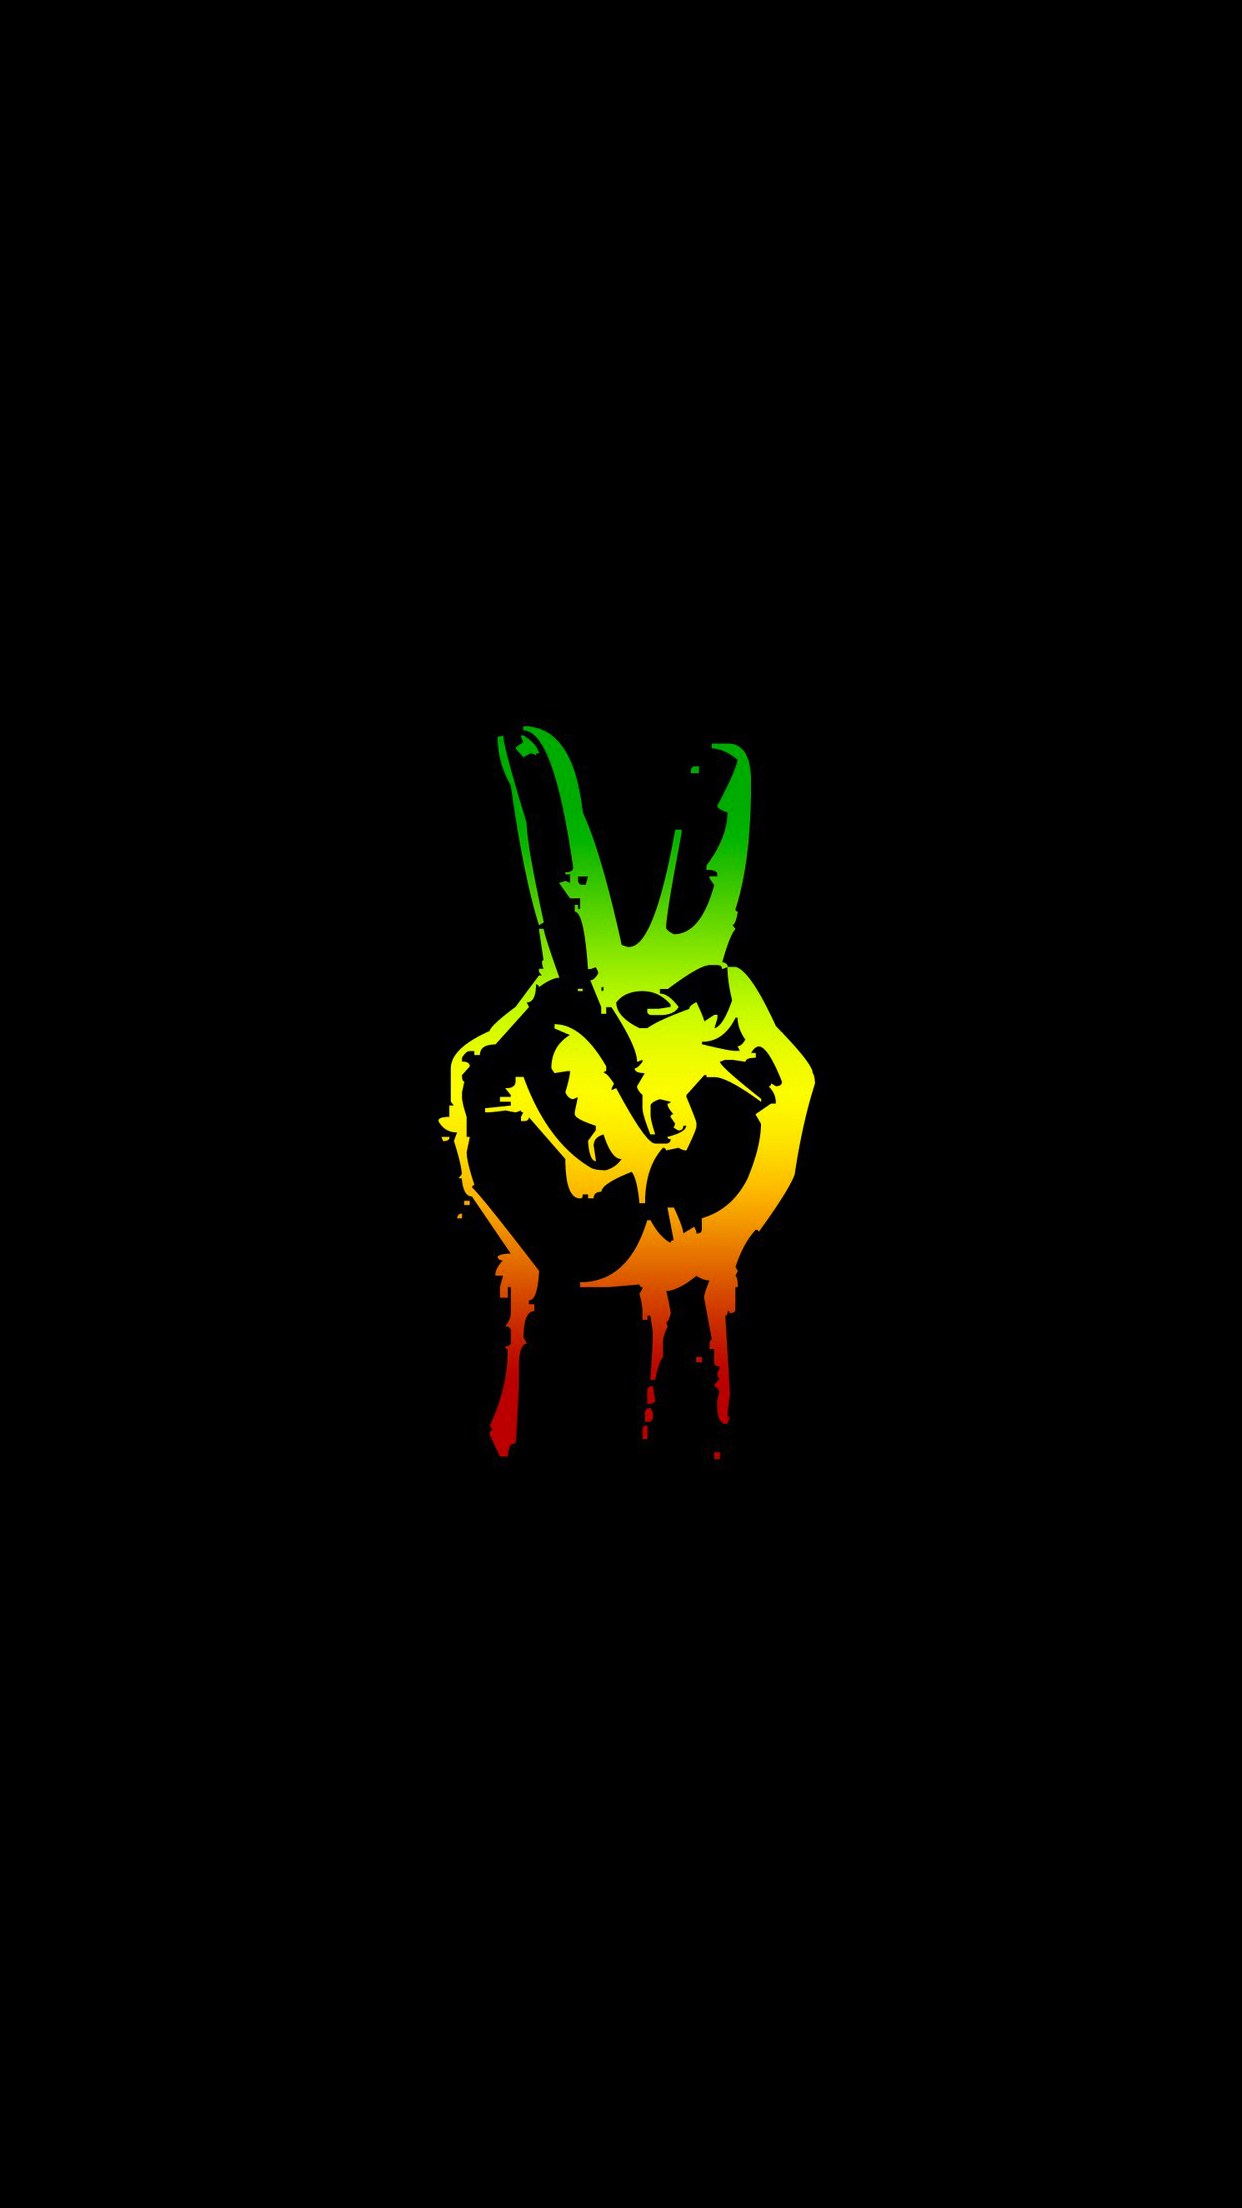 1242x2208 Reggae peace Wallpaper for iPhone 11, Pro Max, X, 8, 7, 6 Free Download on 3Wallpapers